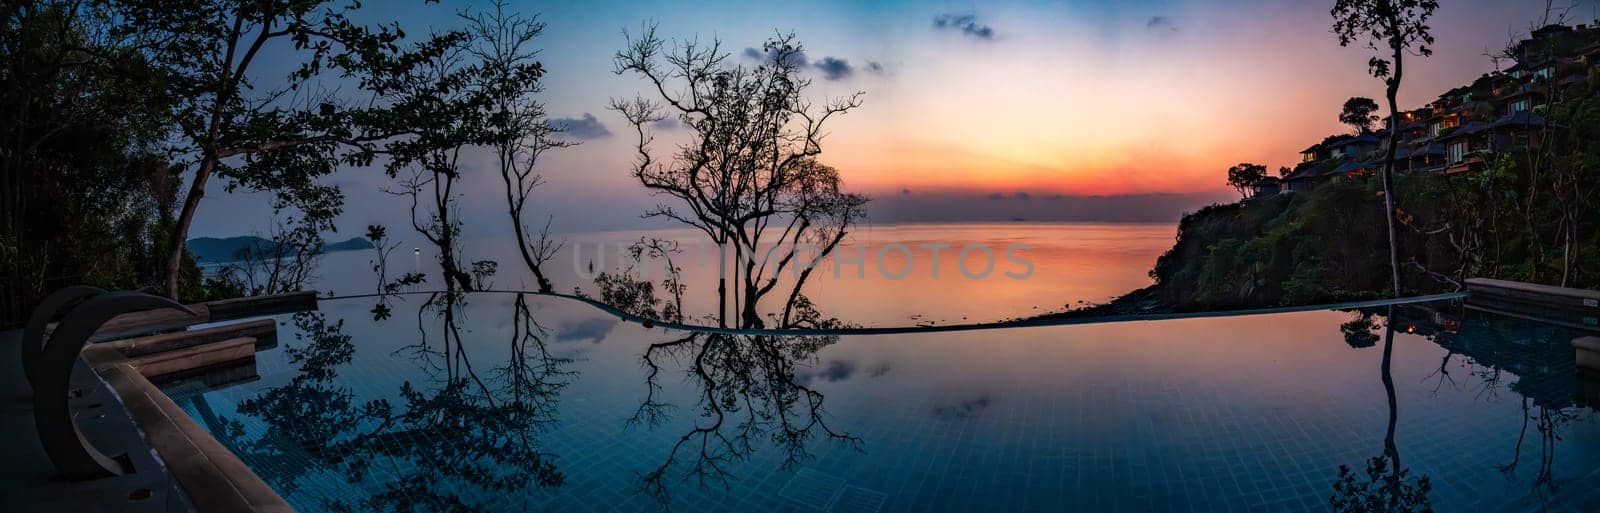 View of Cape Panwa beach at sunset, in Phuket, Thailand, south east Asia